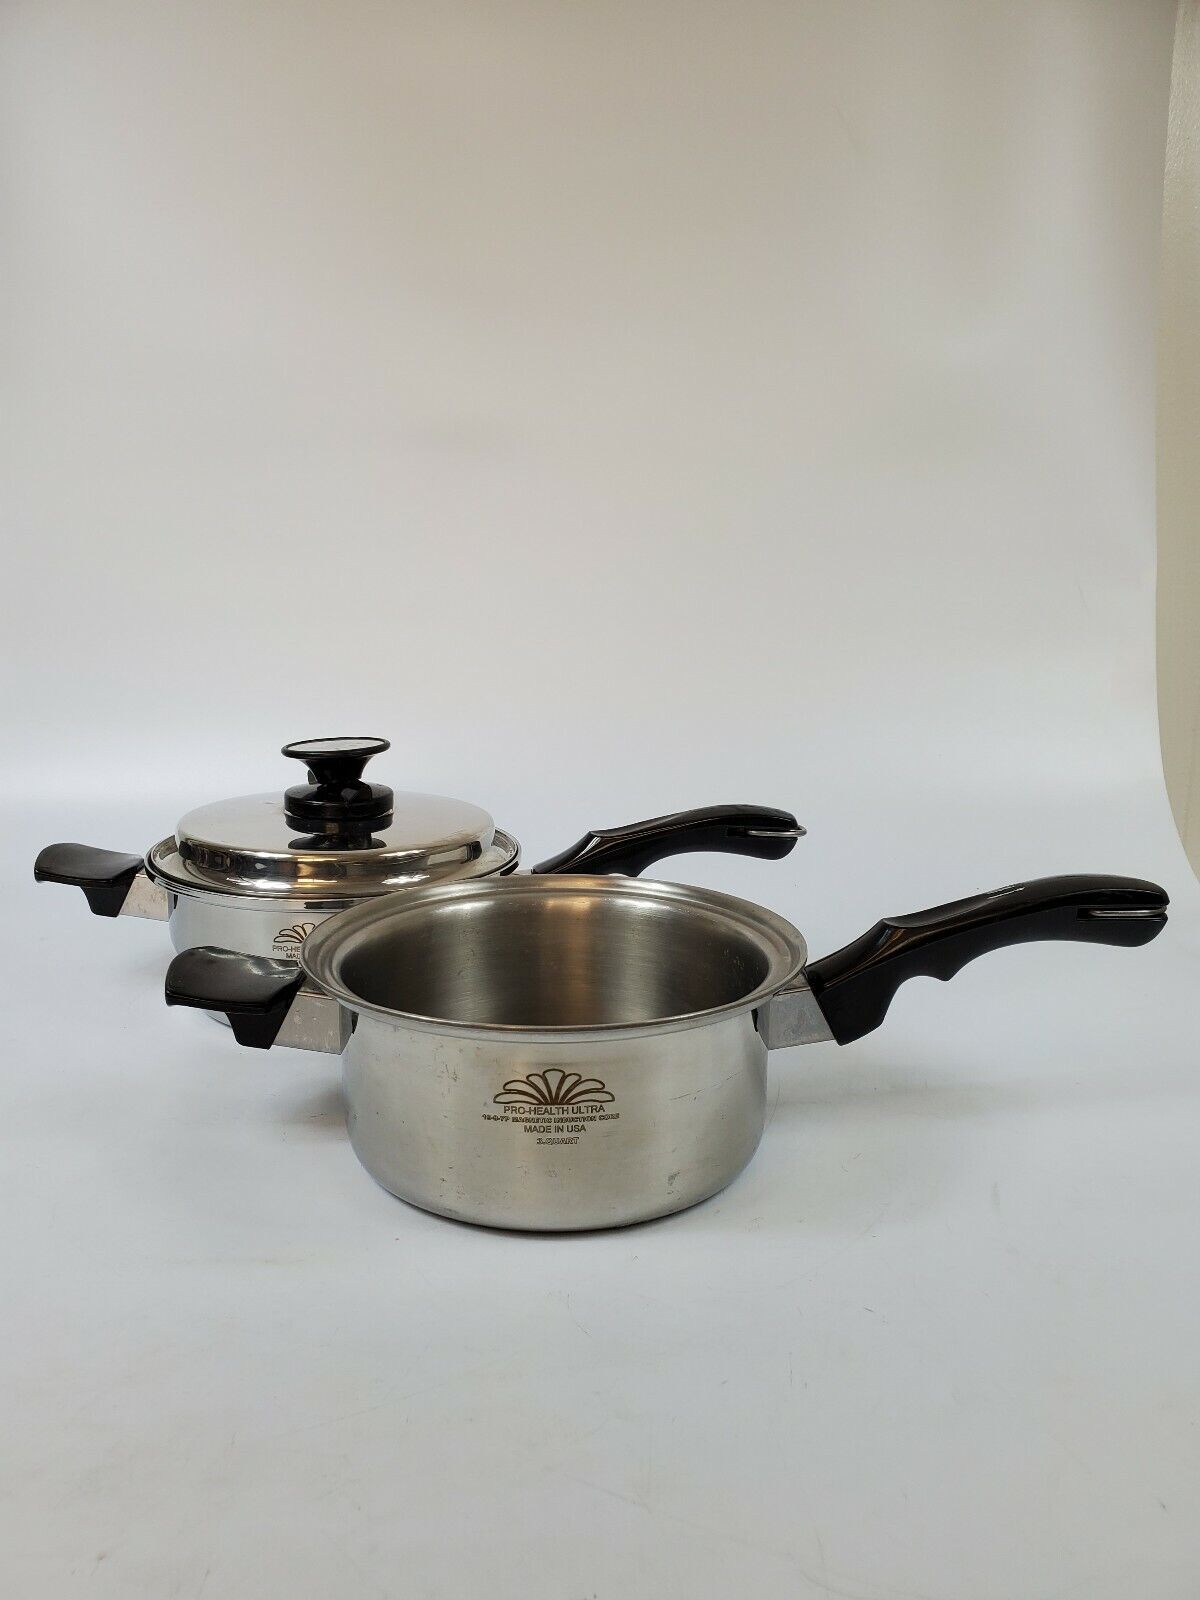 PRO HEALTH ULTRA 3 qt heat Induction colander and 3 qt steamer. Preowned 